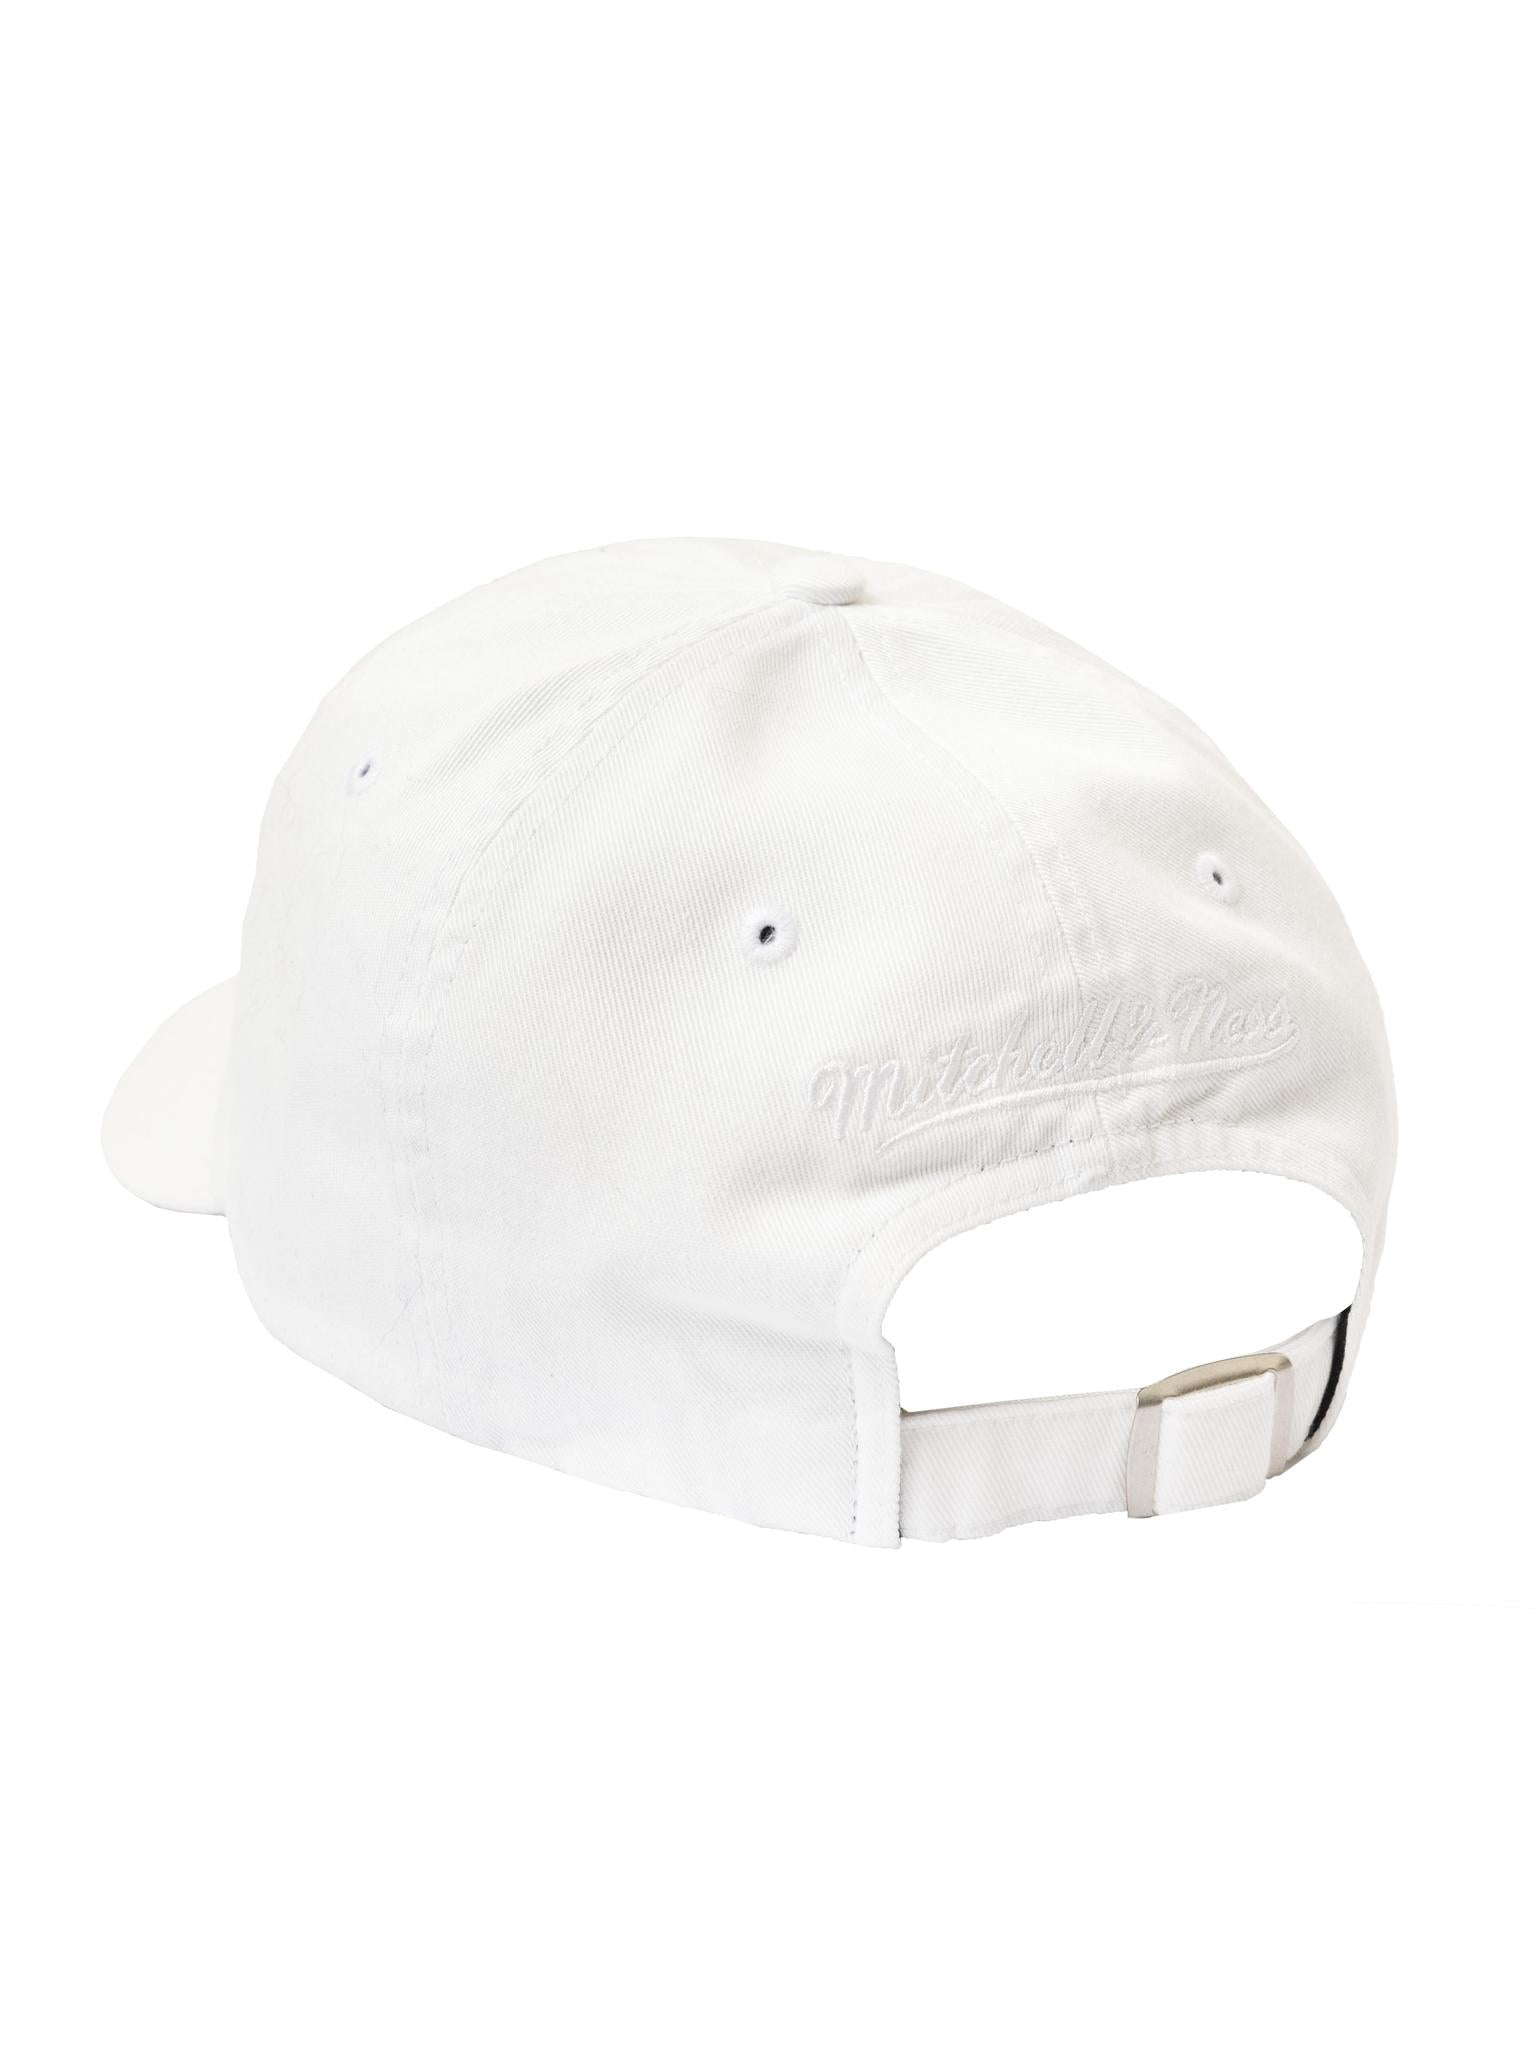 Washed White Arch Dad Cap - Adelaide 36ers